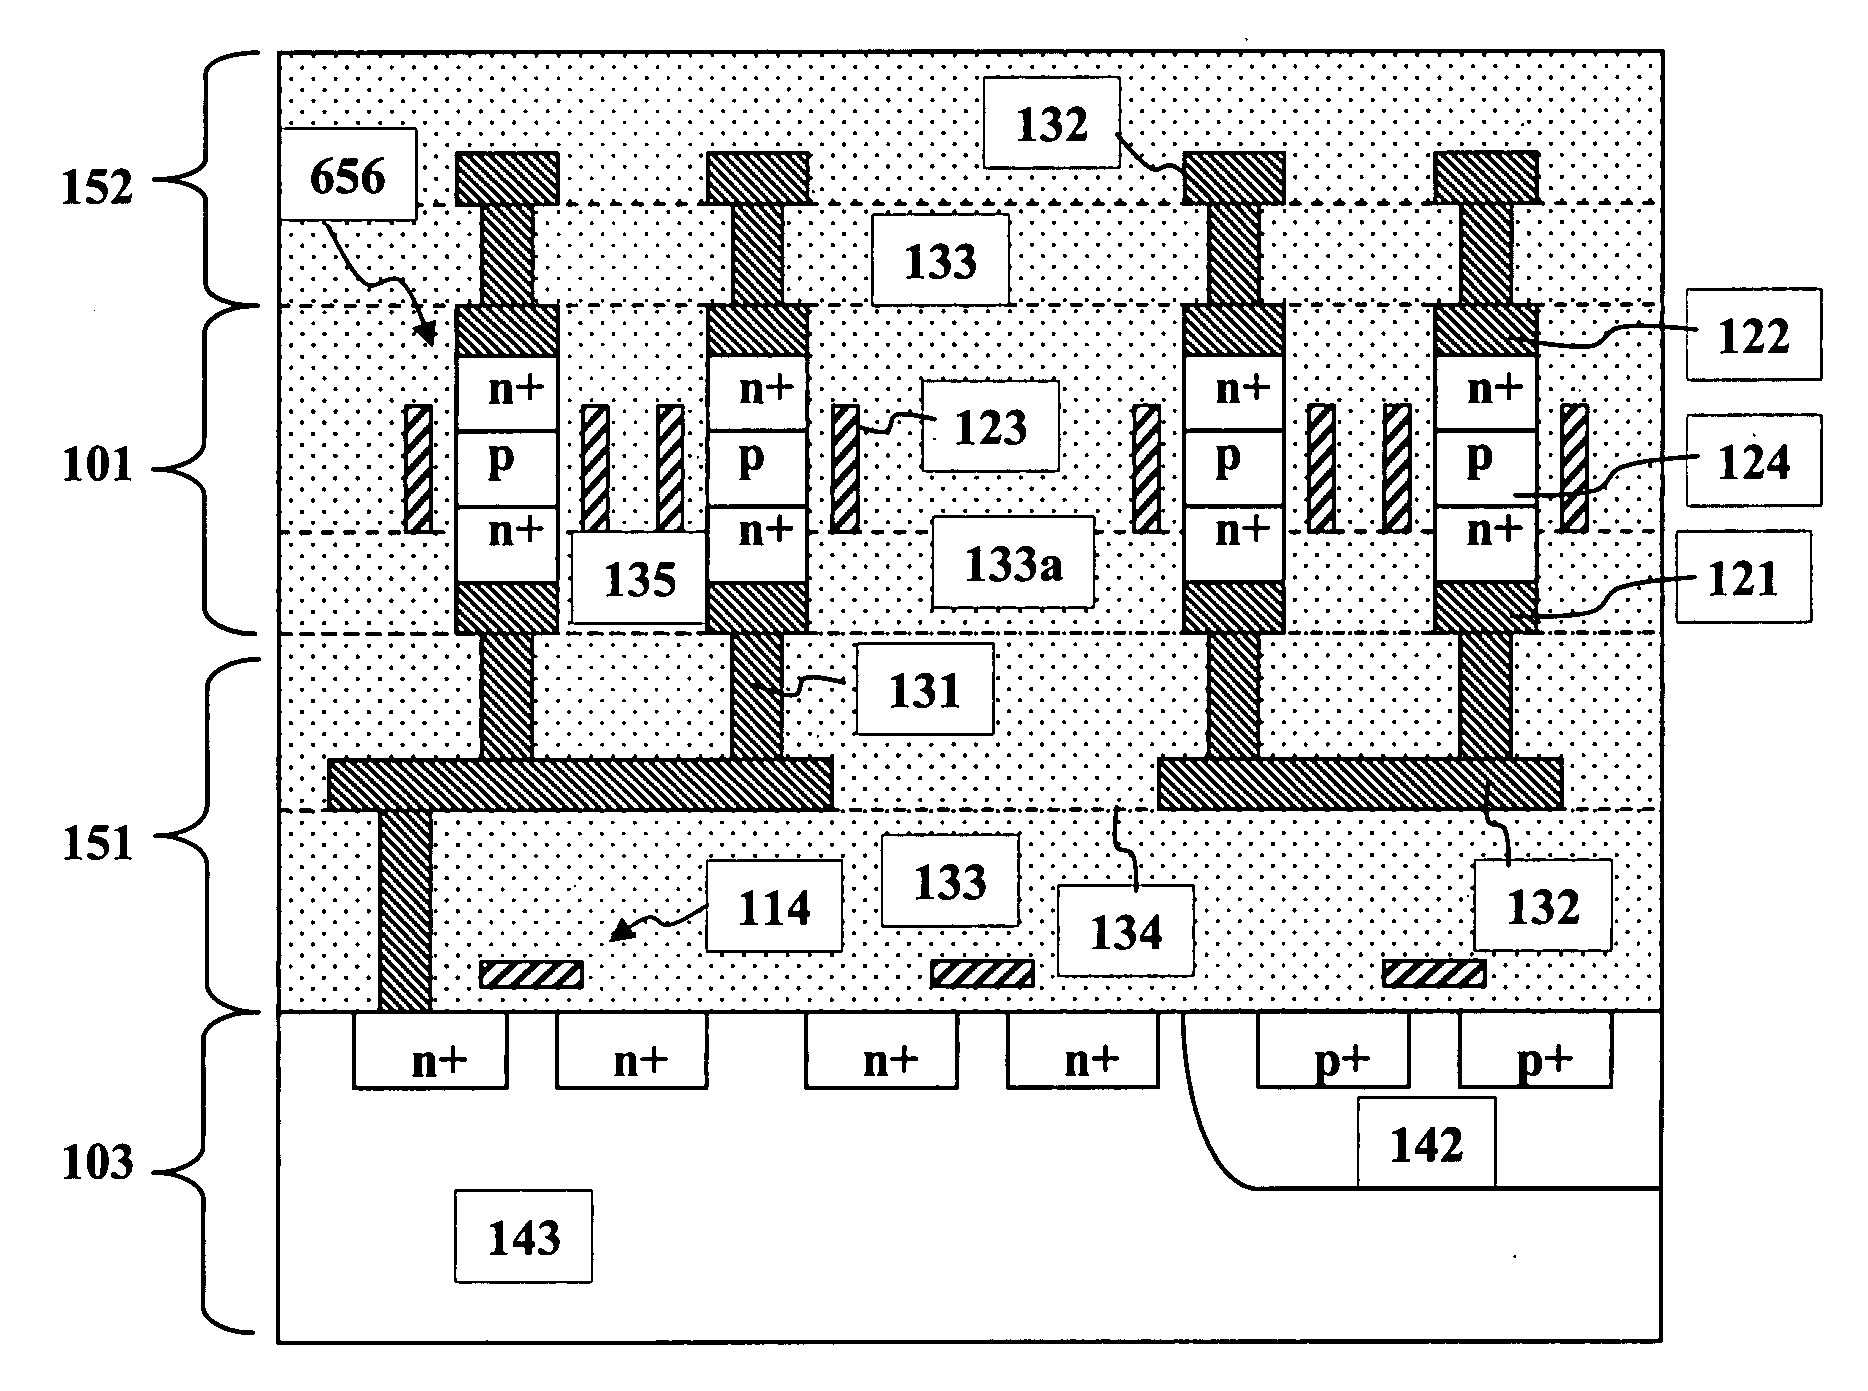 Vertical memory device structures